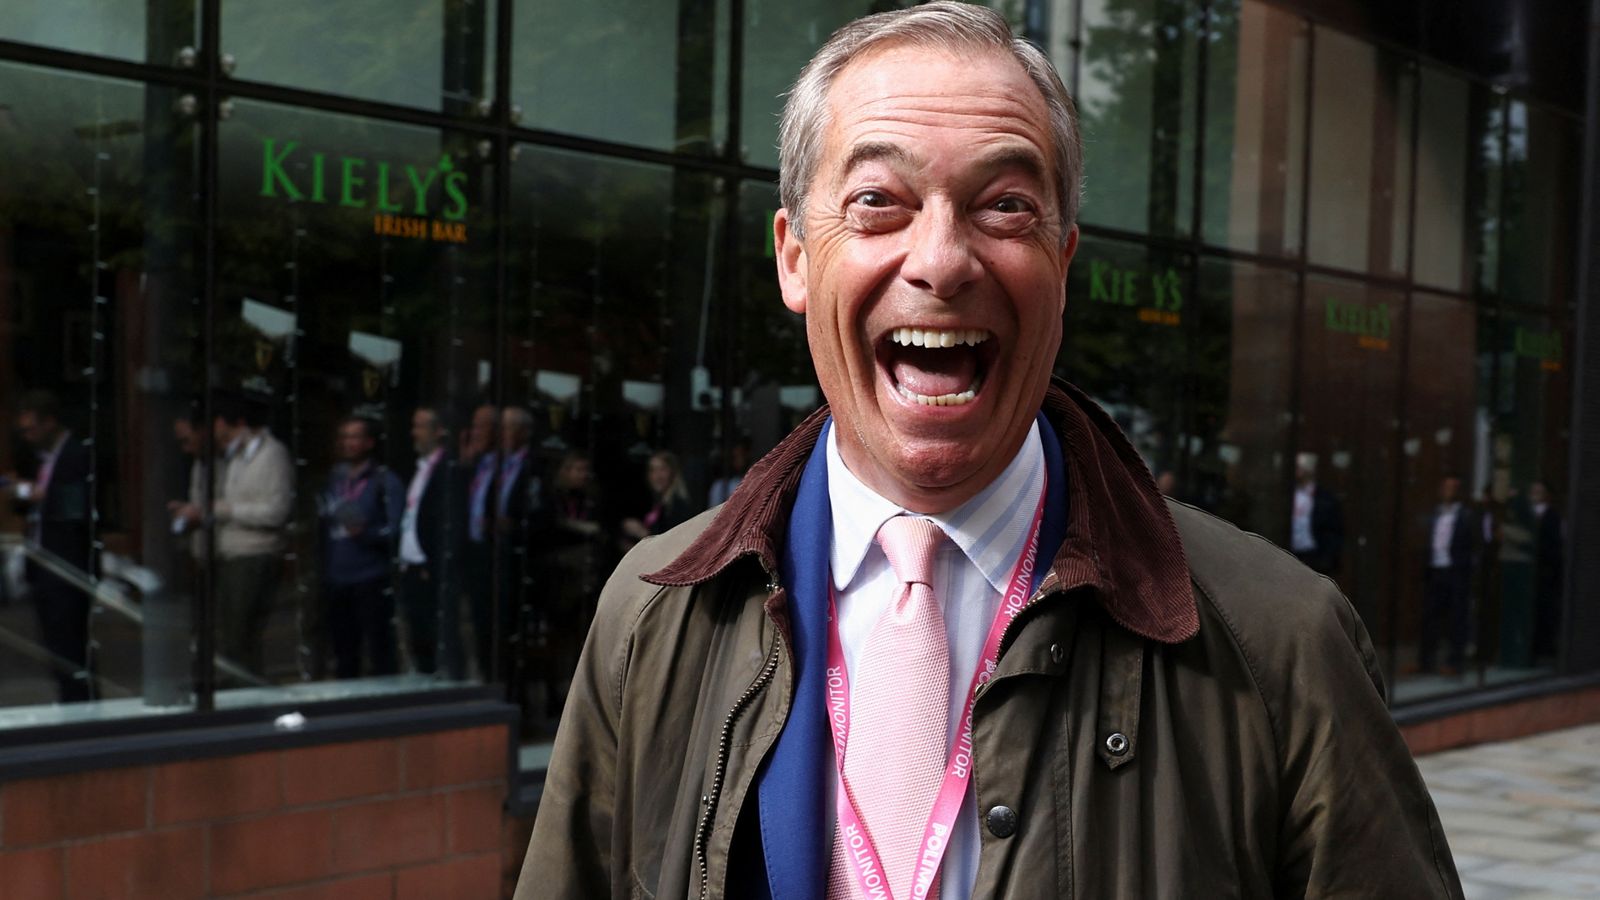 Nigel Farage giving 'very serious consideration' to joining I'm A Celeb - and will make a decision in the next 48 hours